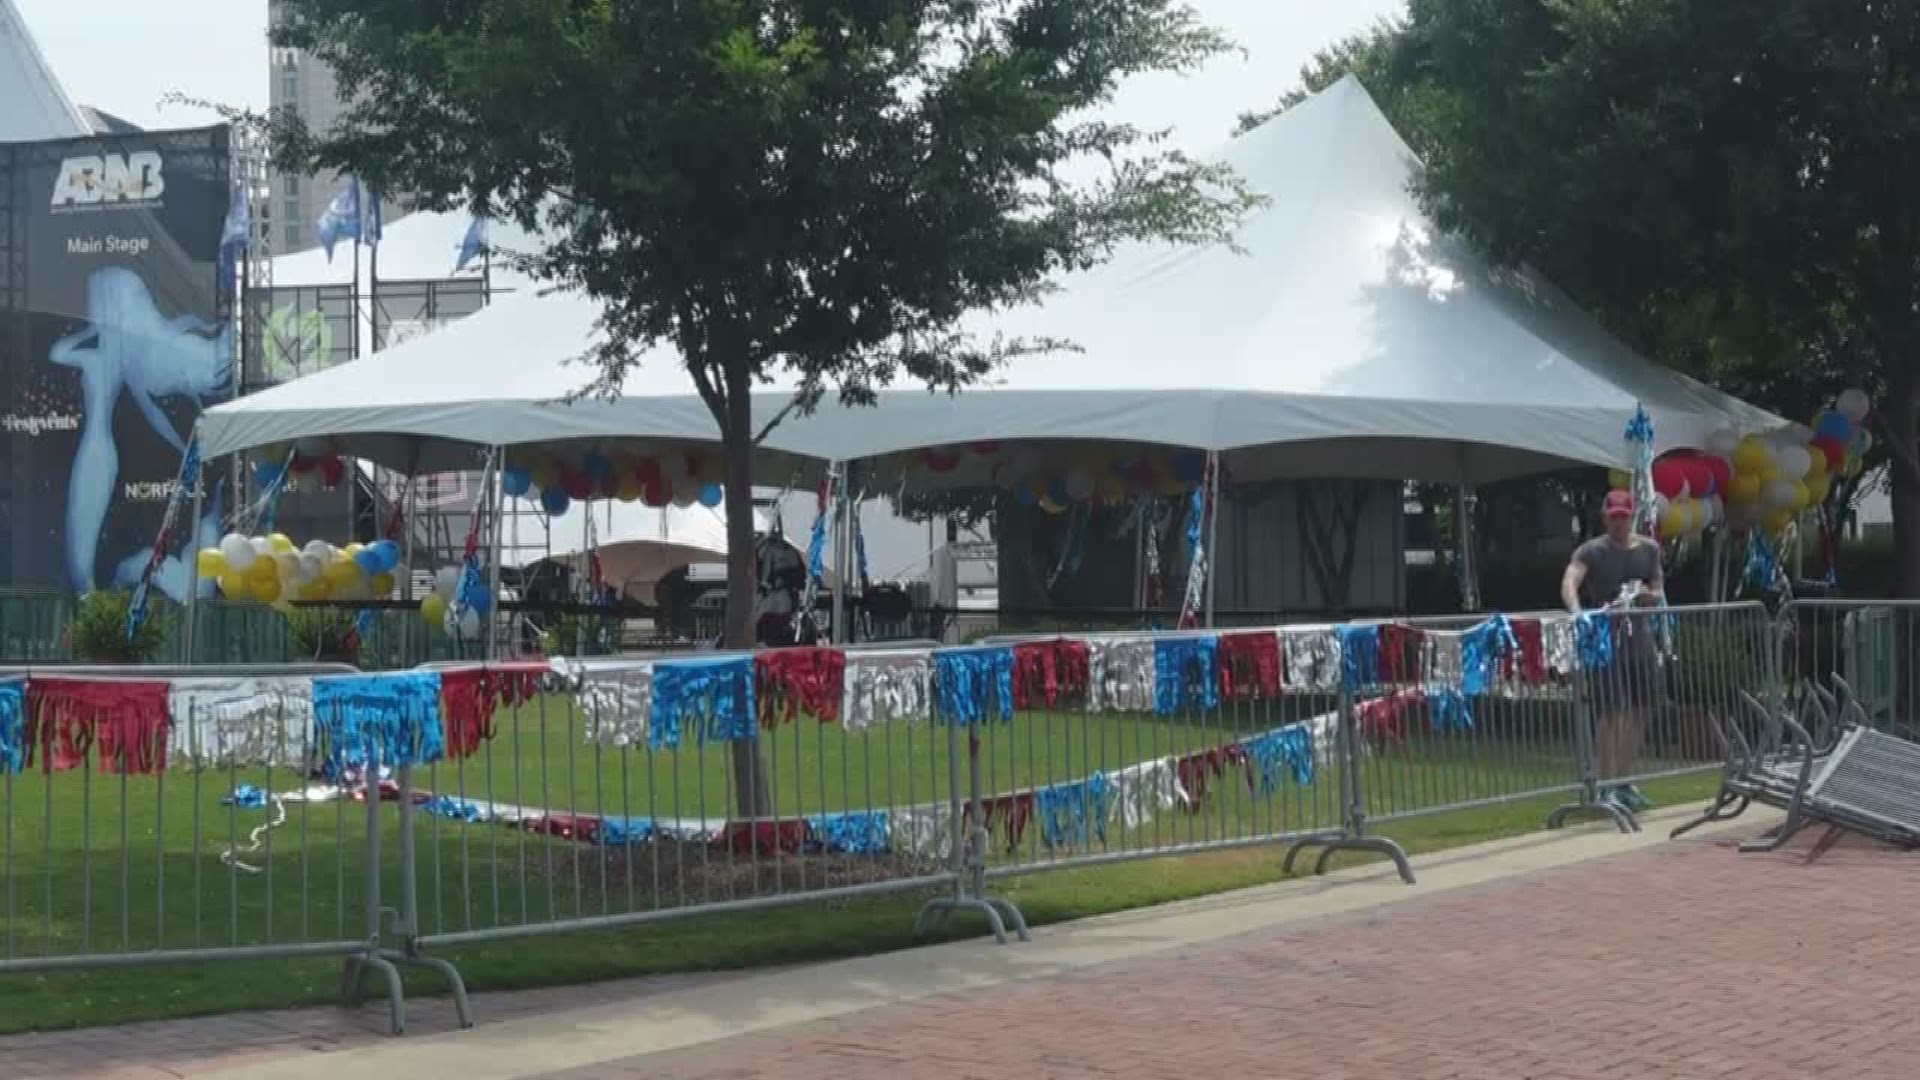 Town Point Park will hold an Independence Day celebration with live entertainment, food and fireworks.